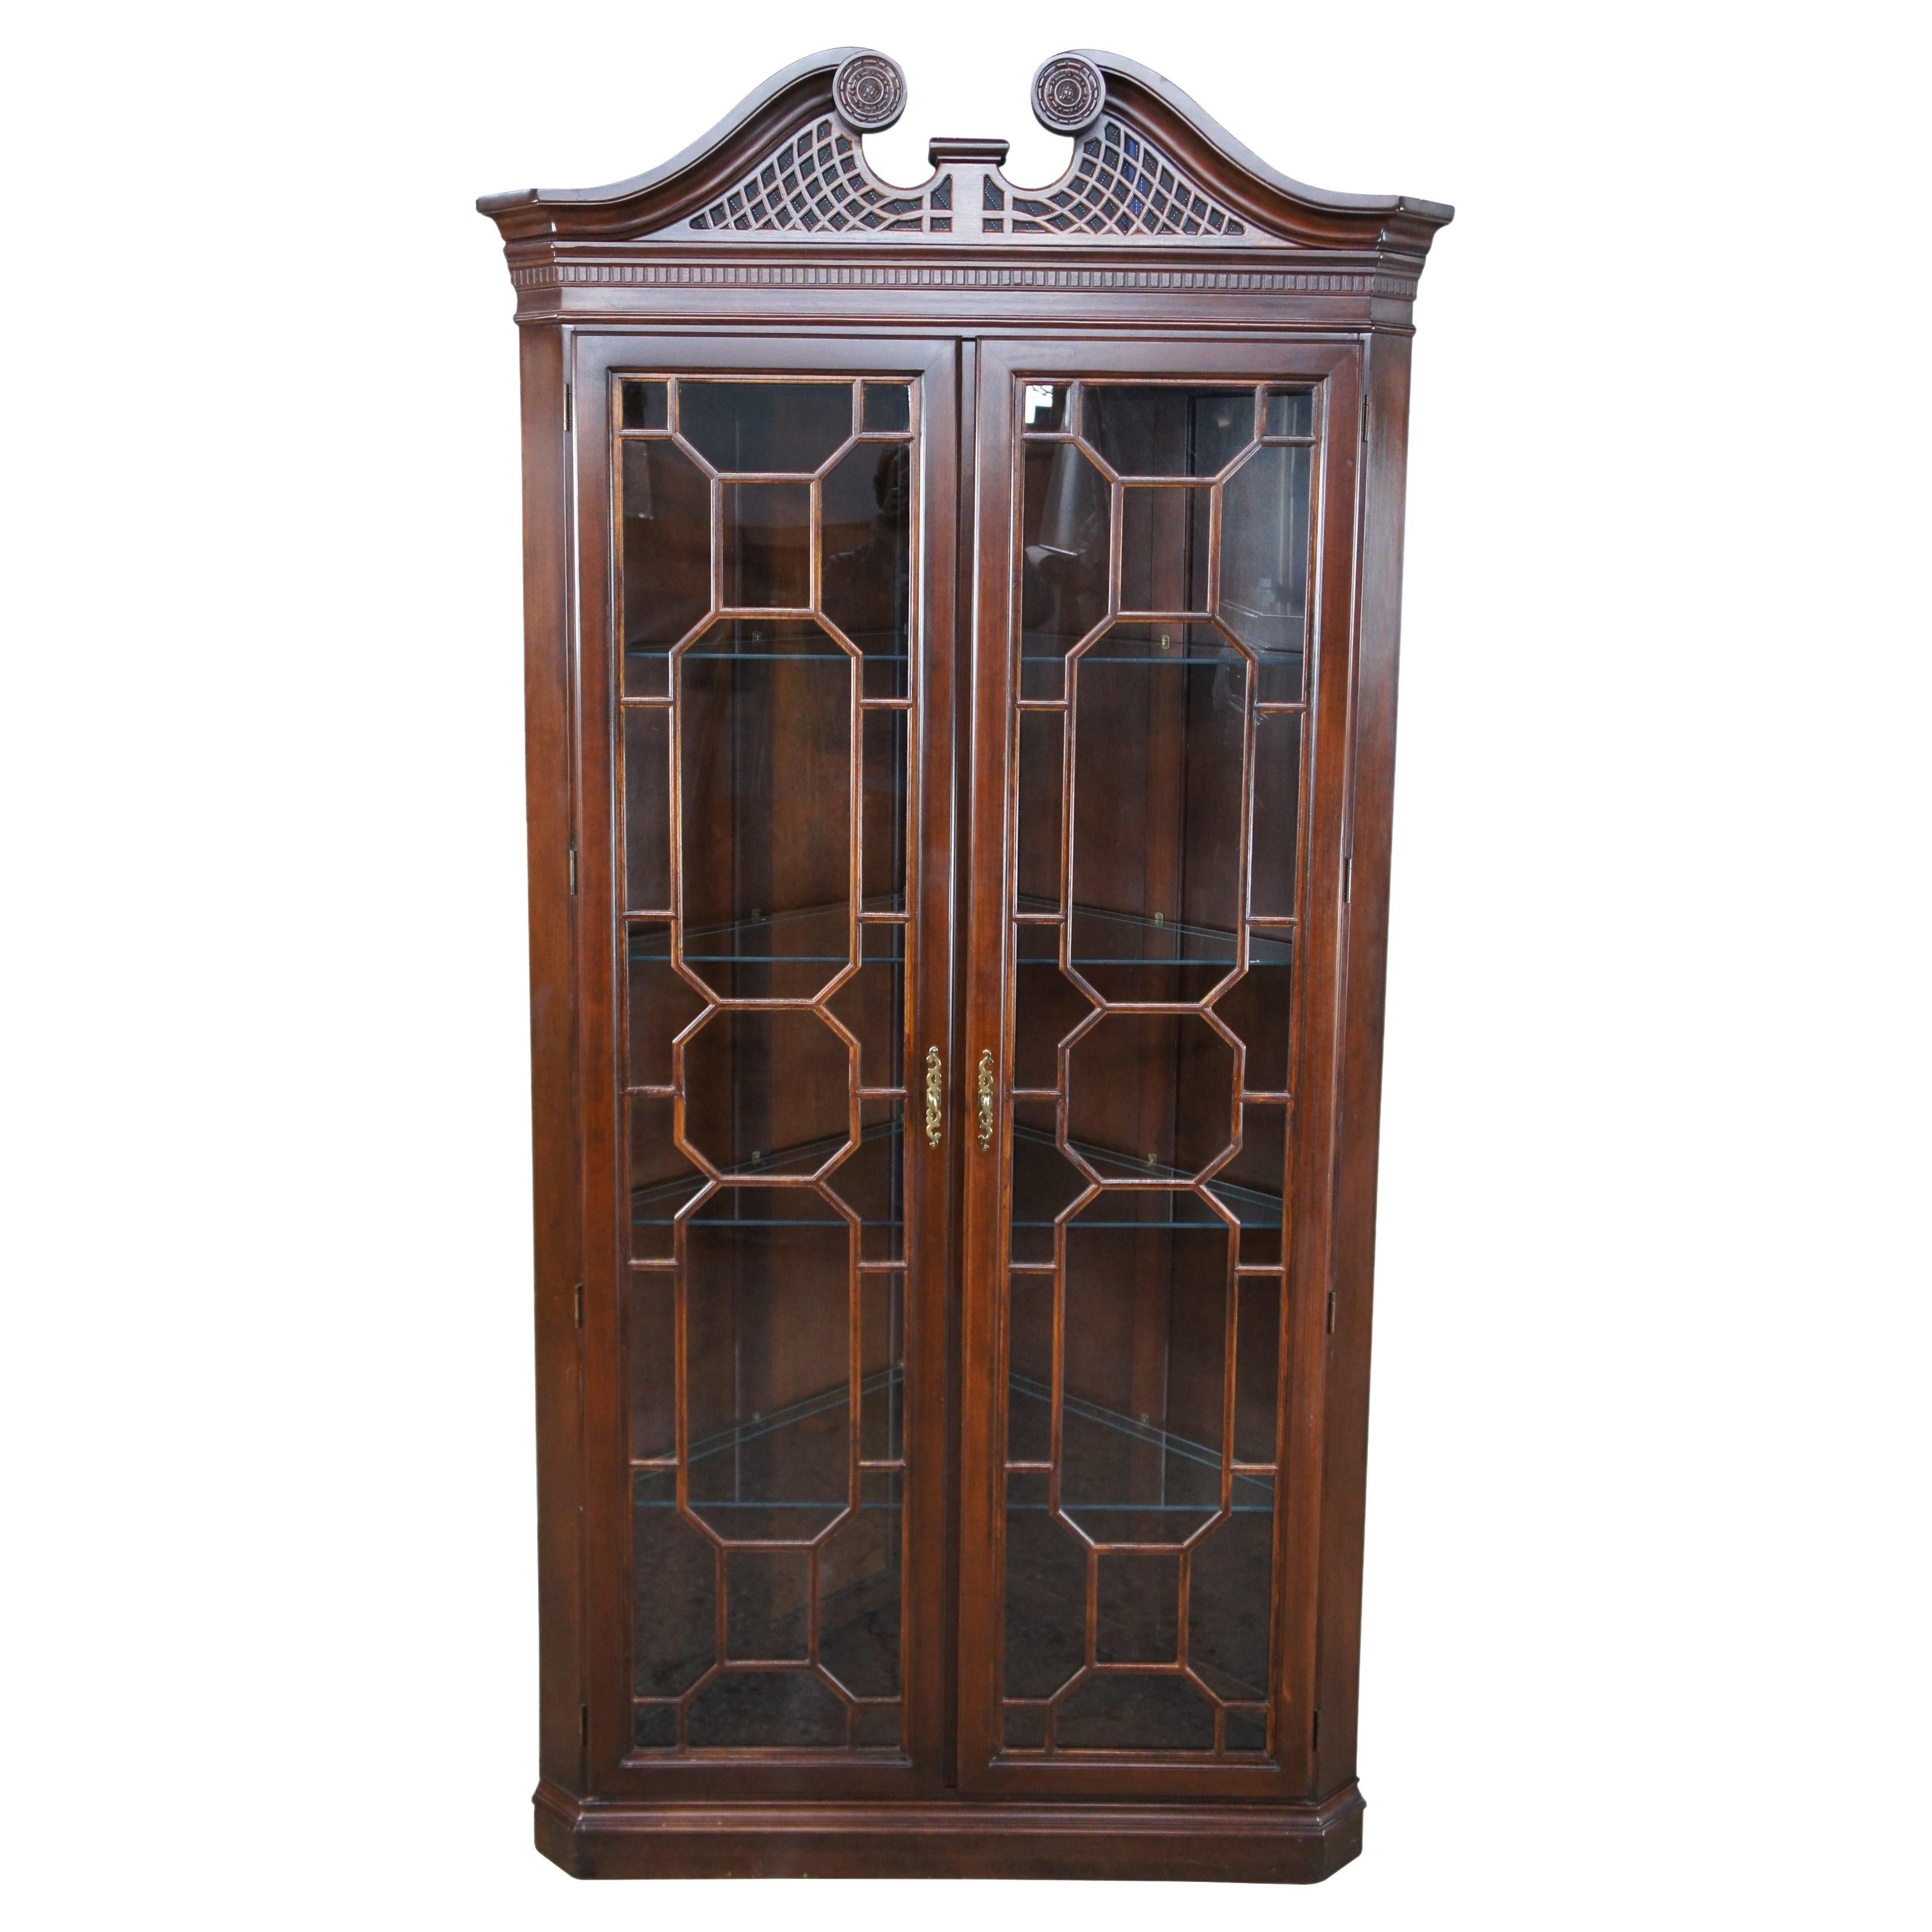 Harden Furniture American Cherry Illuminated corner cabinet, circa 1980s. Features Chippendale or Georgian styling with fretwork trimmed glass doors, an open pediment with pierced lattice work and dentil molding. Includes four glass shelves with